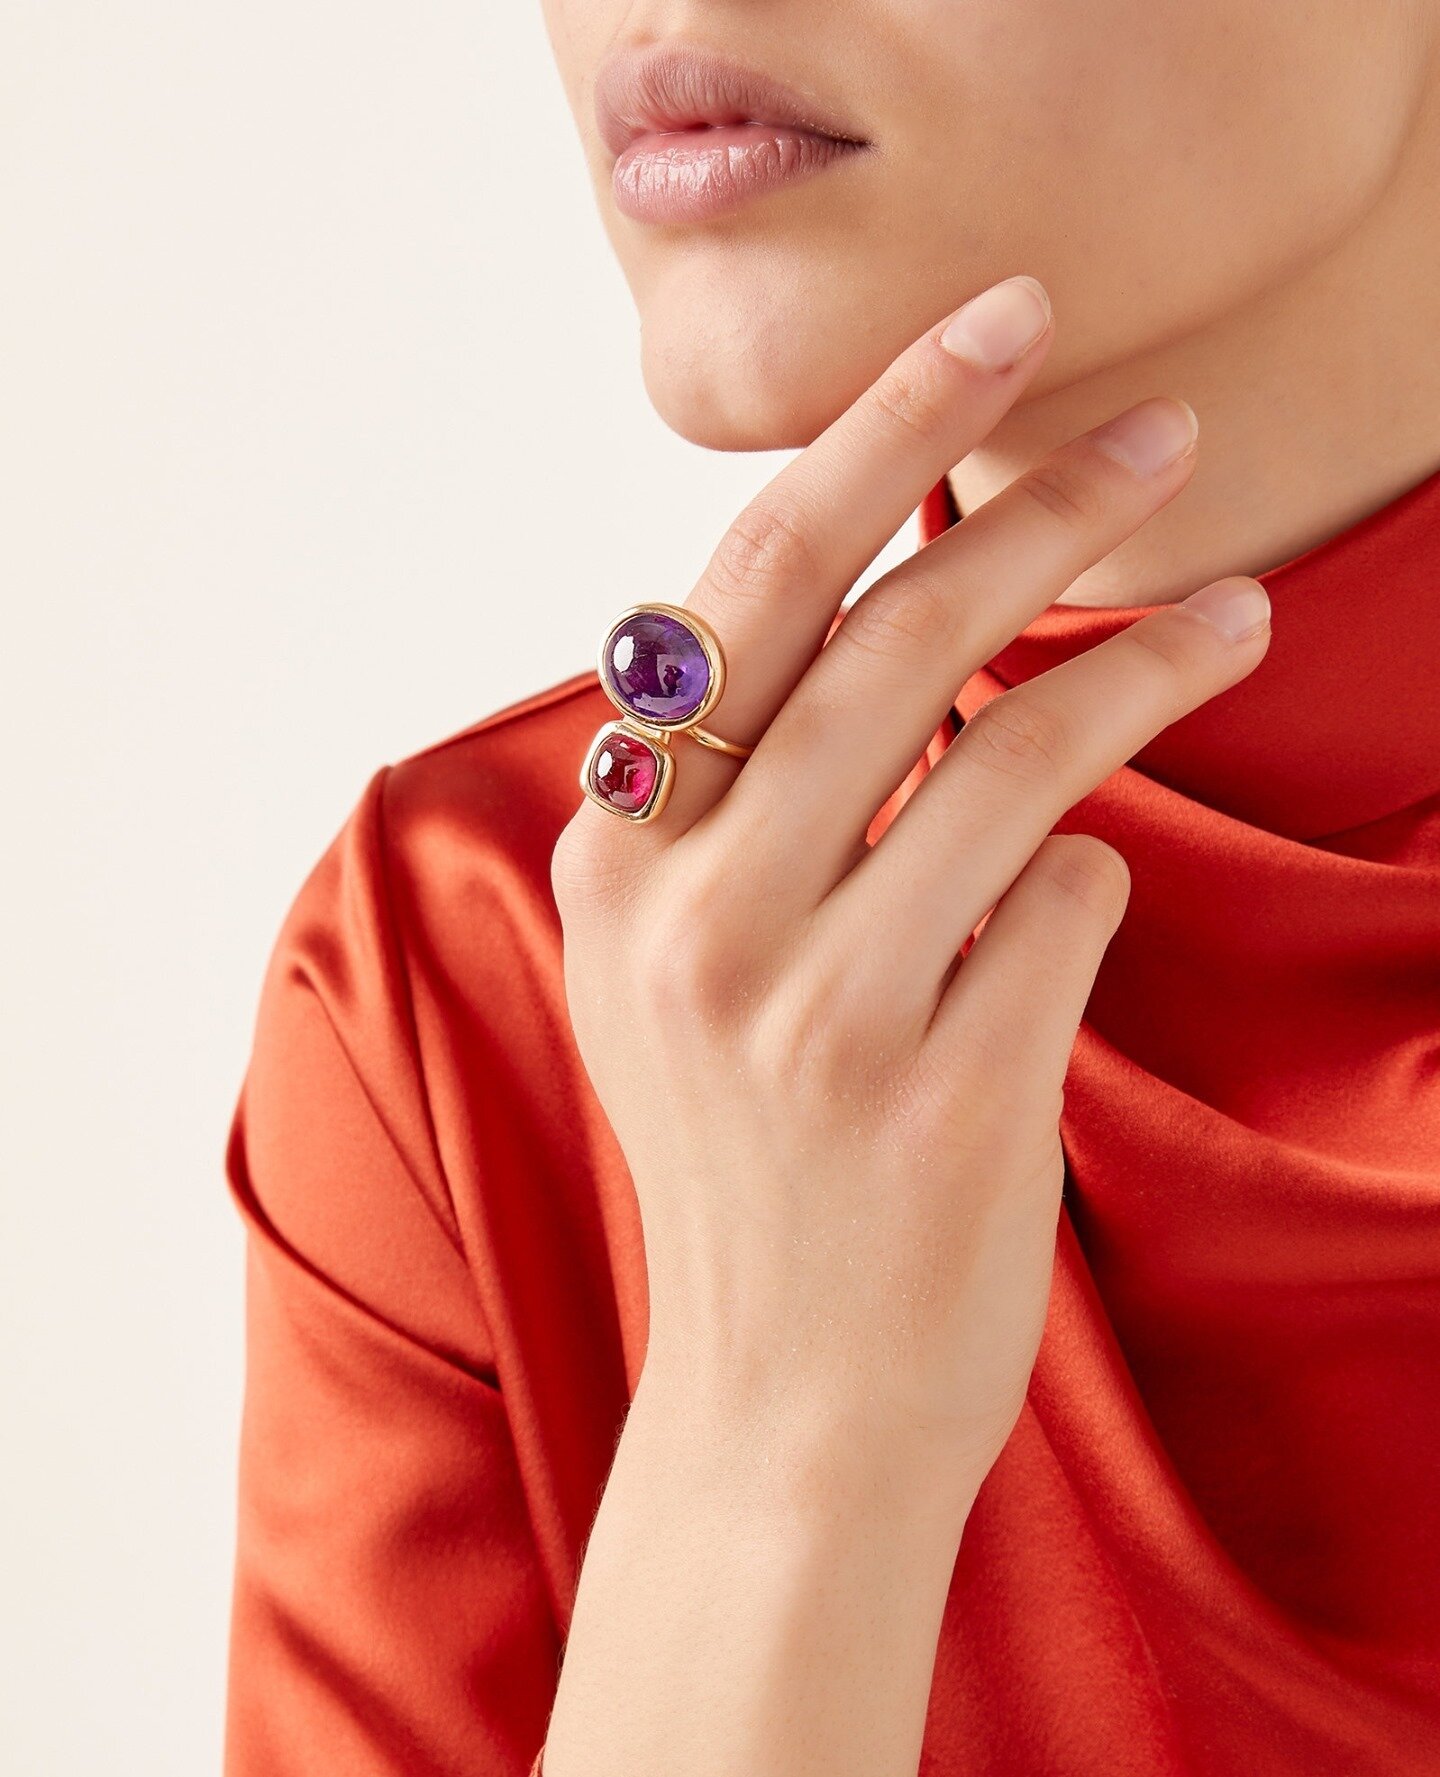 The simplistic yet elevated Cabochons rings can be worn alone, or together for a rainbow of color. 💎#DaleNovickCollection⁠
.⁠
.⁠
.⁠
.⁠
.⁠
.⁠
#Jewelry #FineJewelry #Jewels #LuxuryJewelry #Fashion #Accessories #JewelryDesigner #Ring #Rings #Necklace #